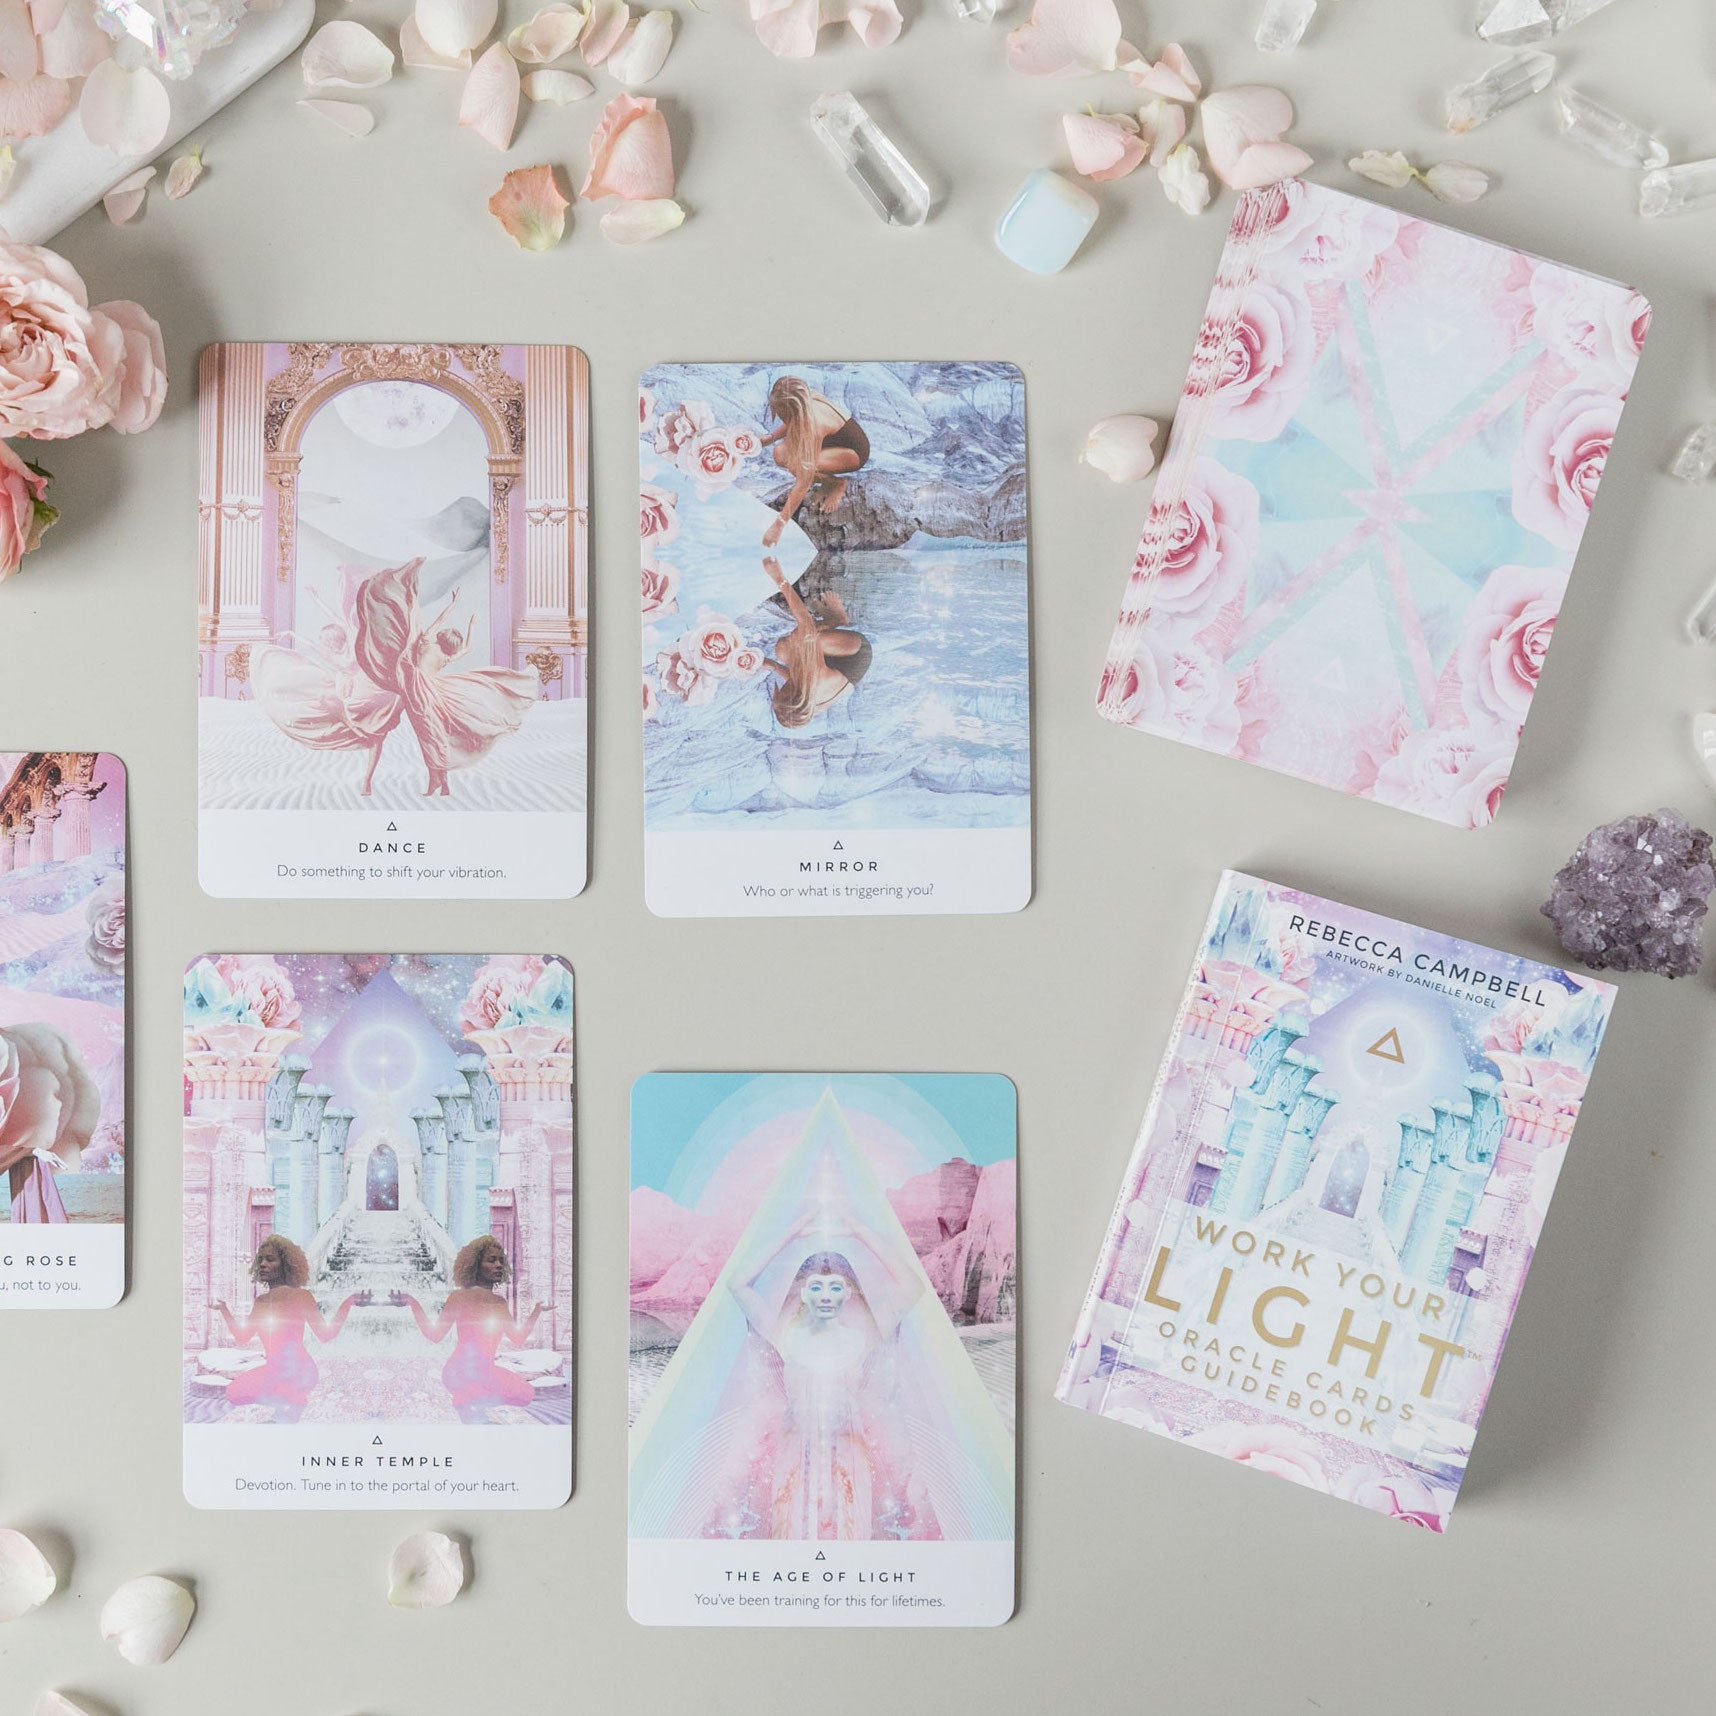 Work Your Light Oracle Cards by Rebecca Campbell 